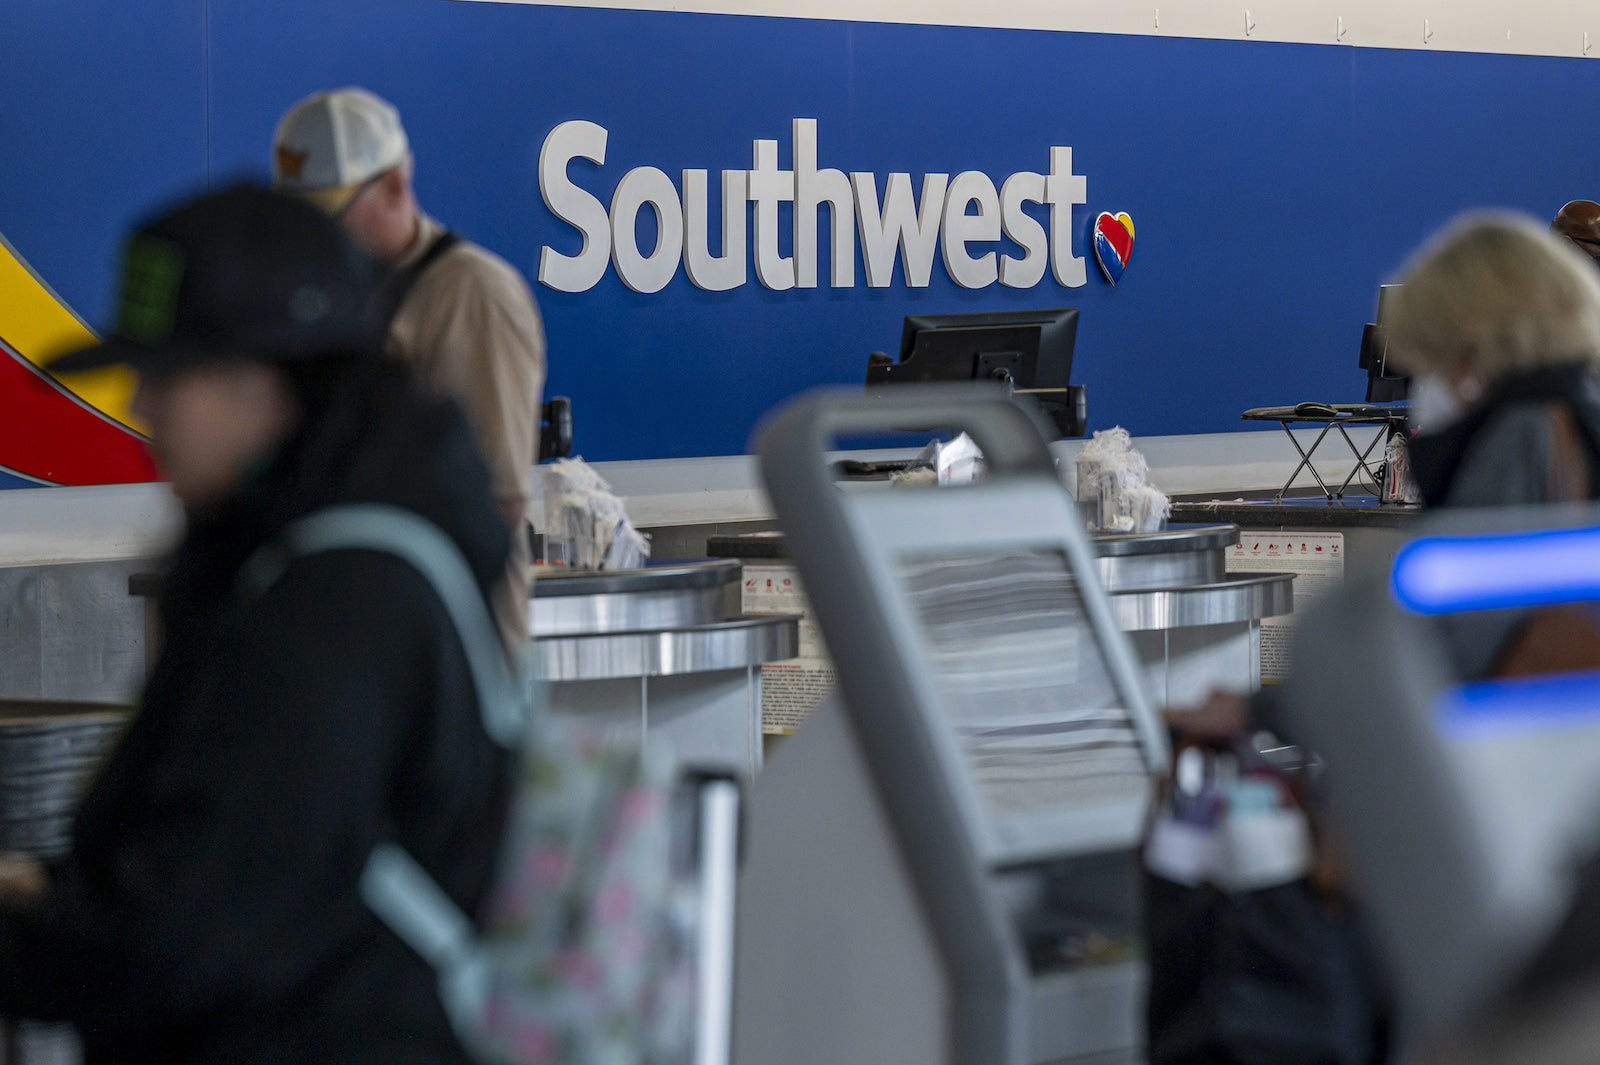 Save up to 40% on Southwest flights, including award redemptions